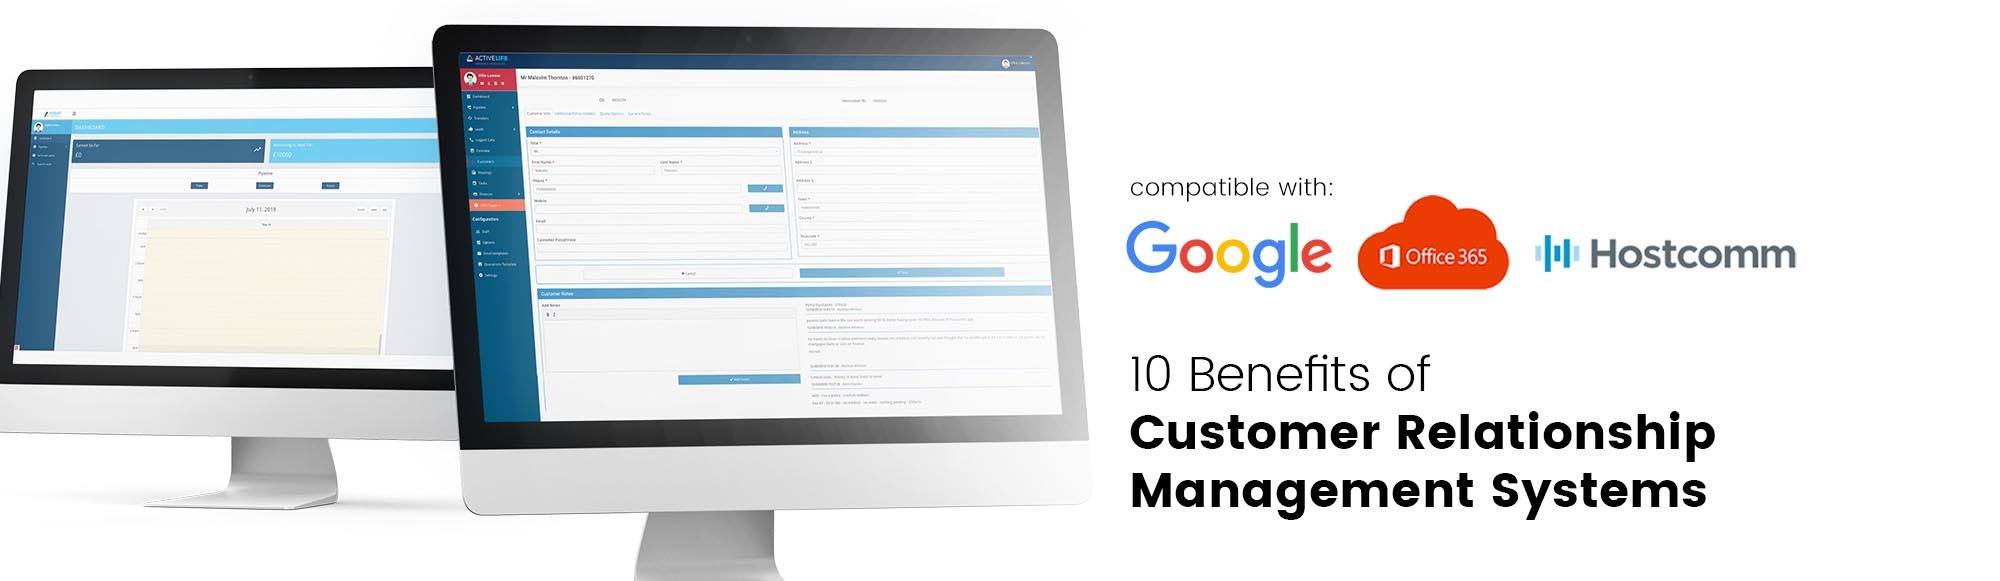 Benefits of Customer Relationship Management Systems